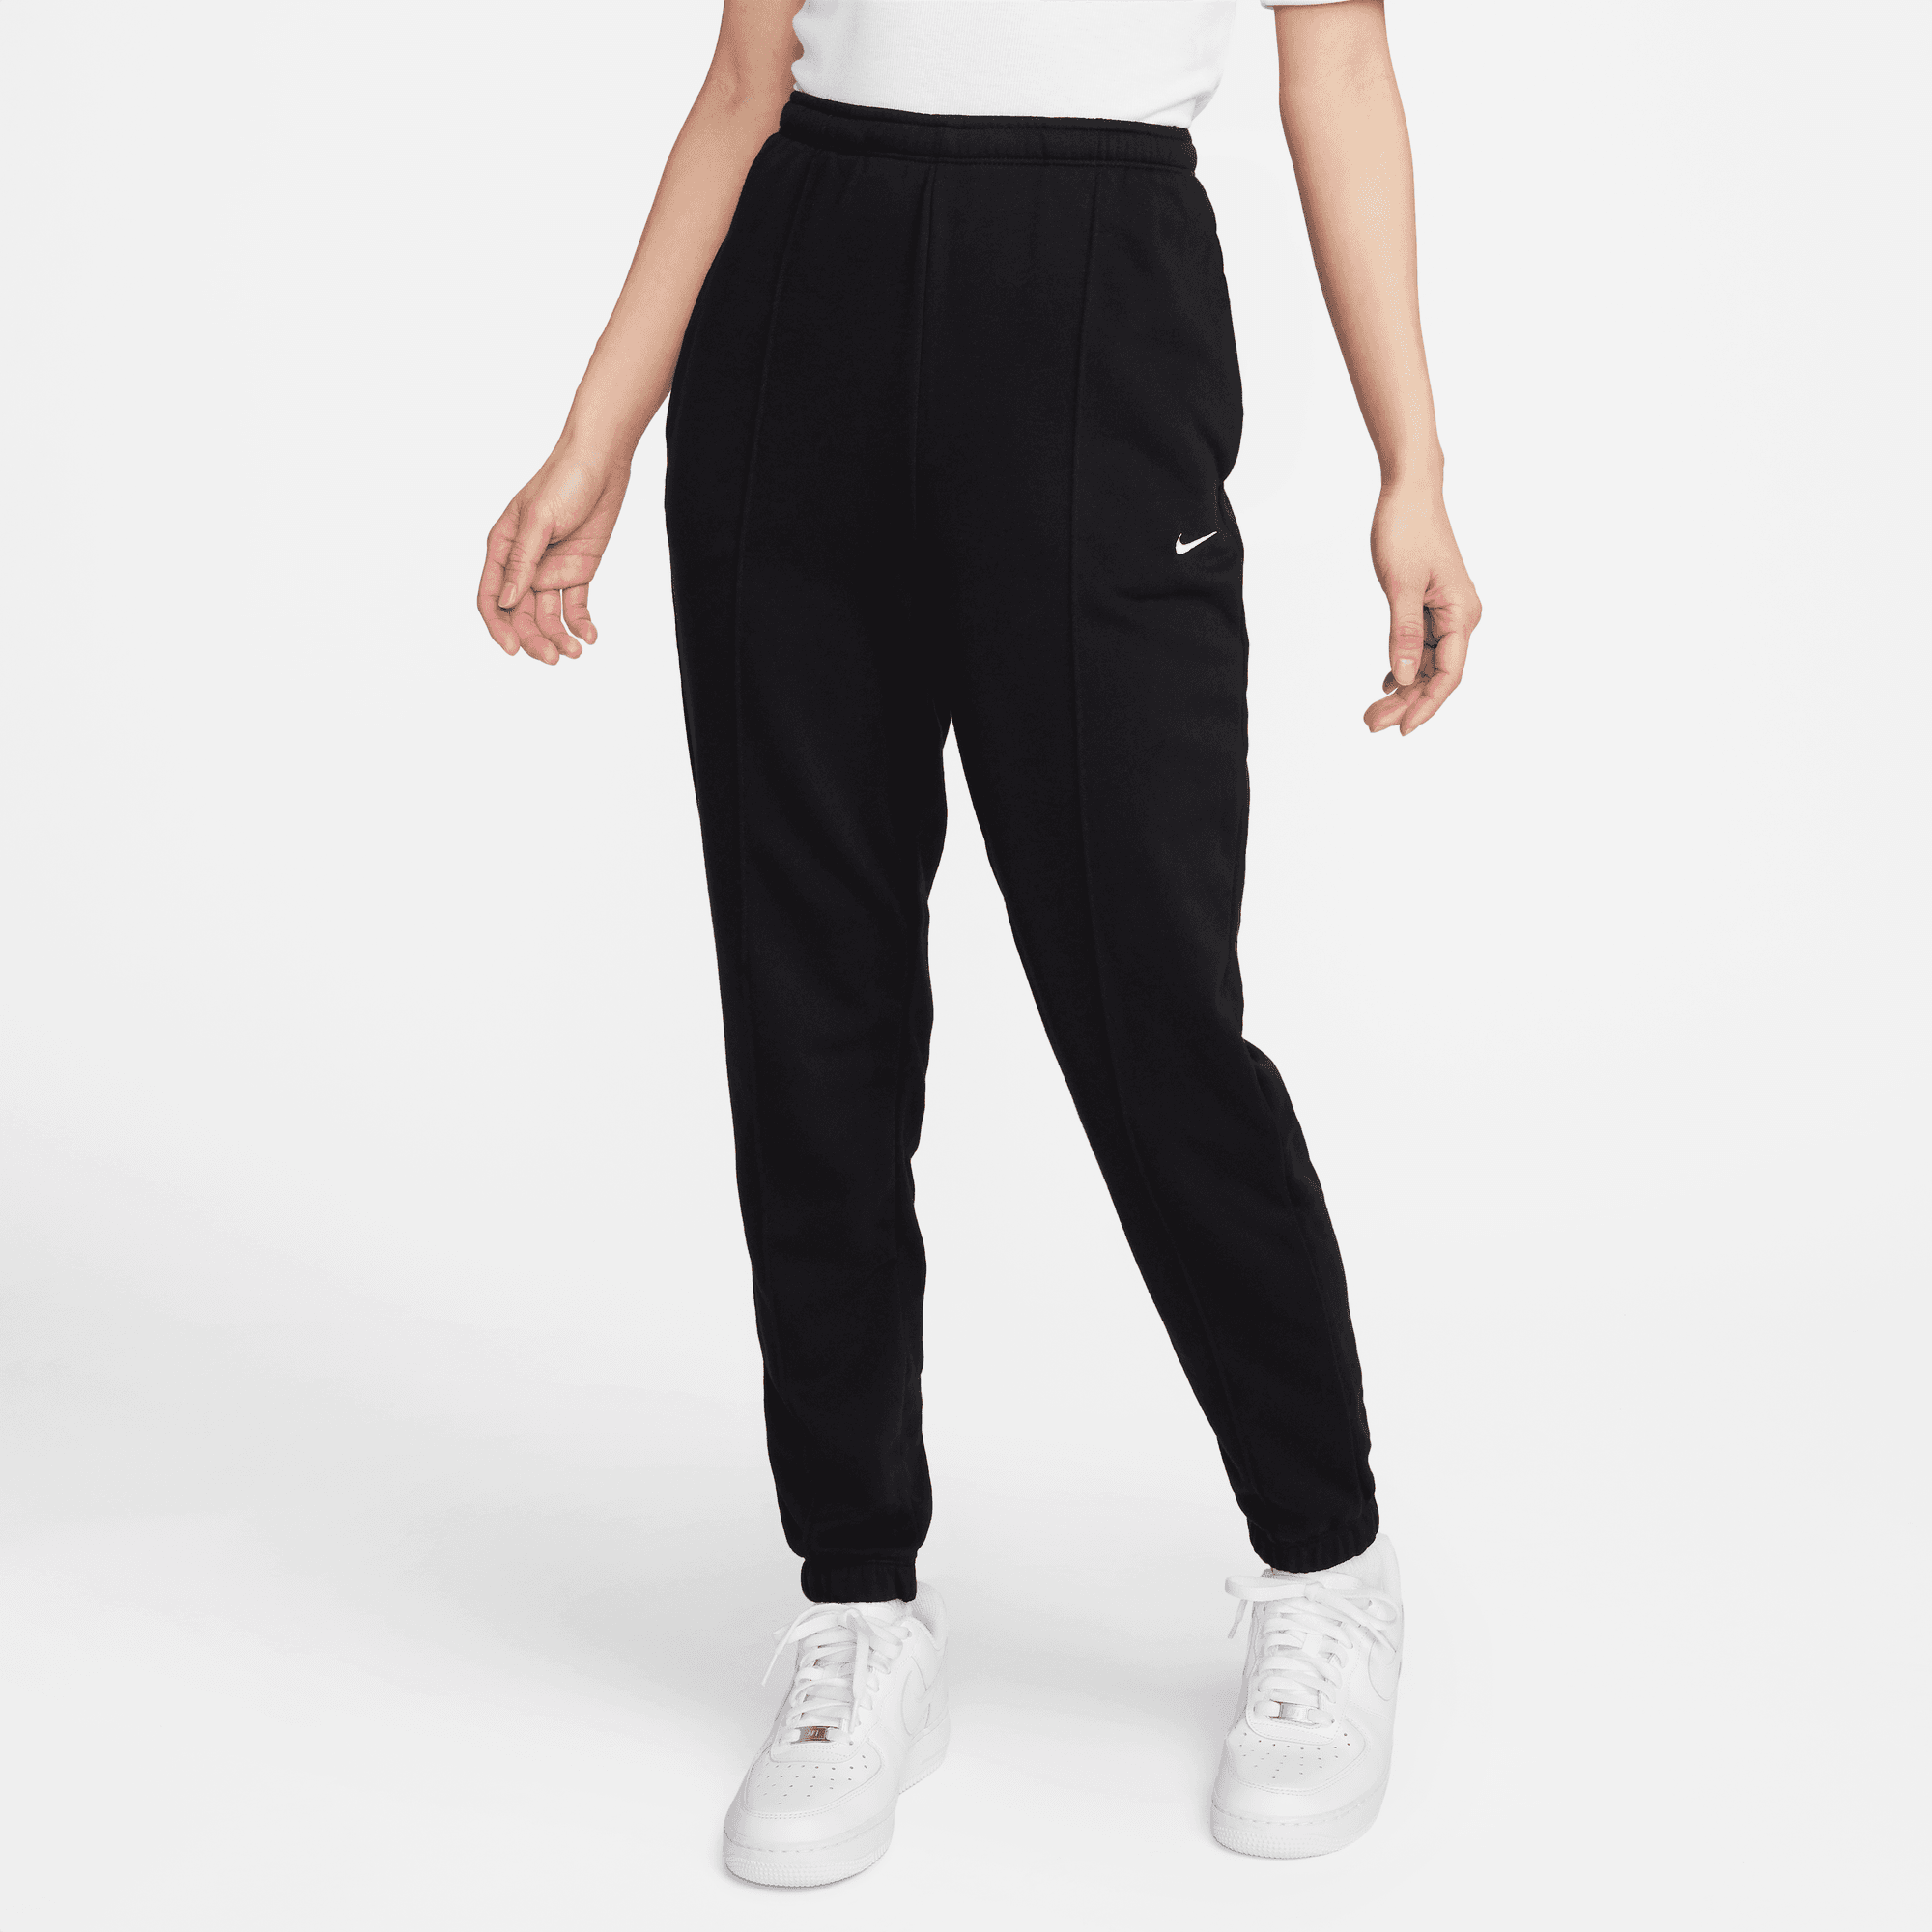 NIKE SPORTSWEAR CHILL TERRY WOMEN'S SLIM HIGH-WAISTED FRENCH TERRY